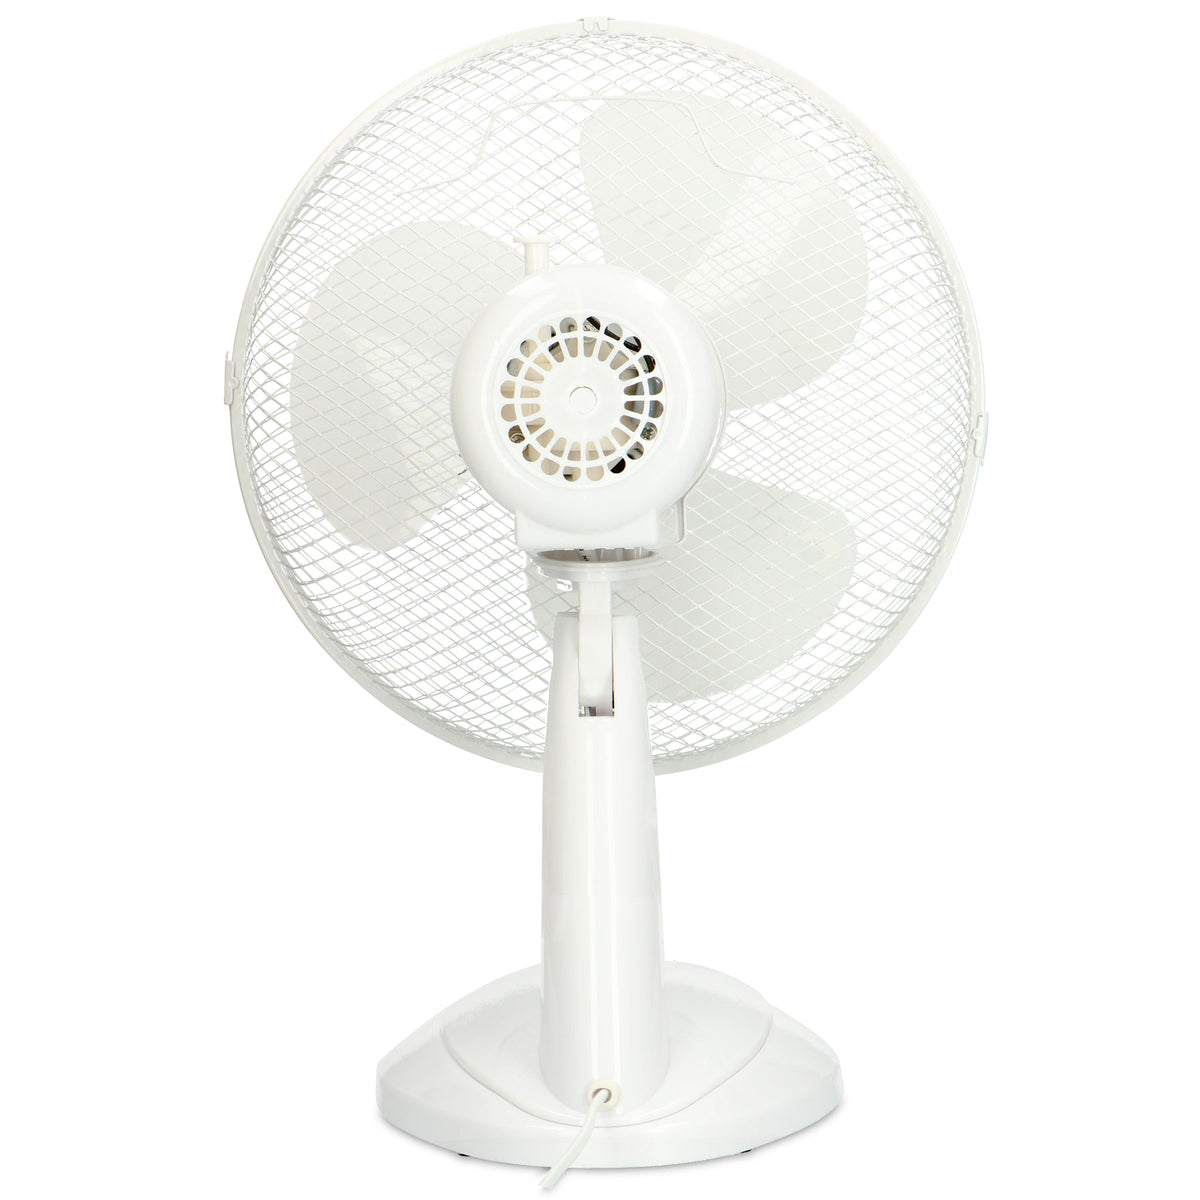 Trebs 30CM Table Fan - White | 99381 from Trebs - DID Electrical